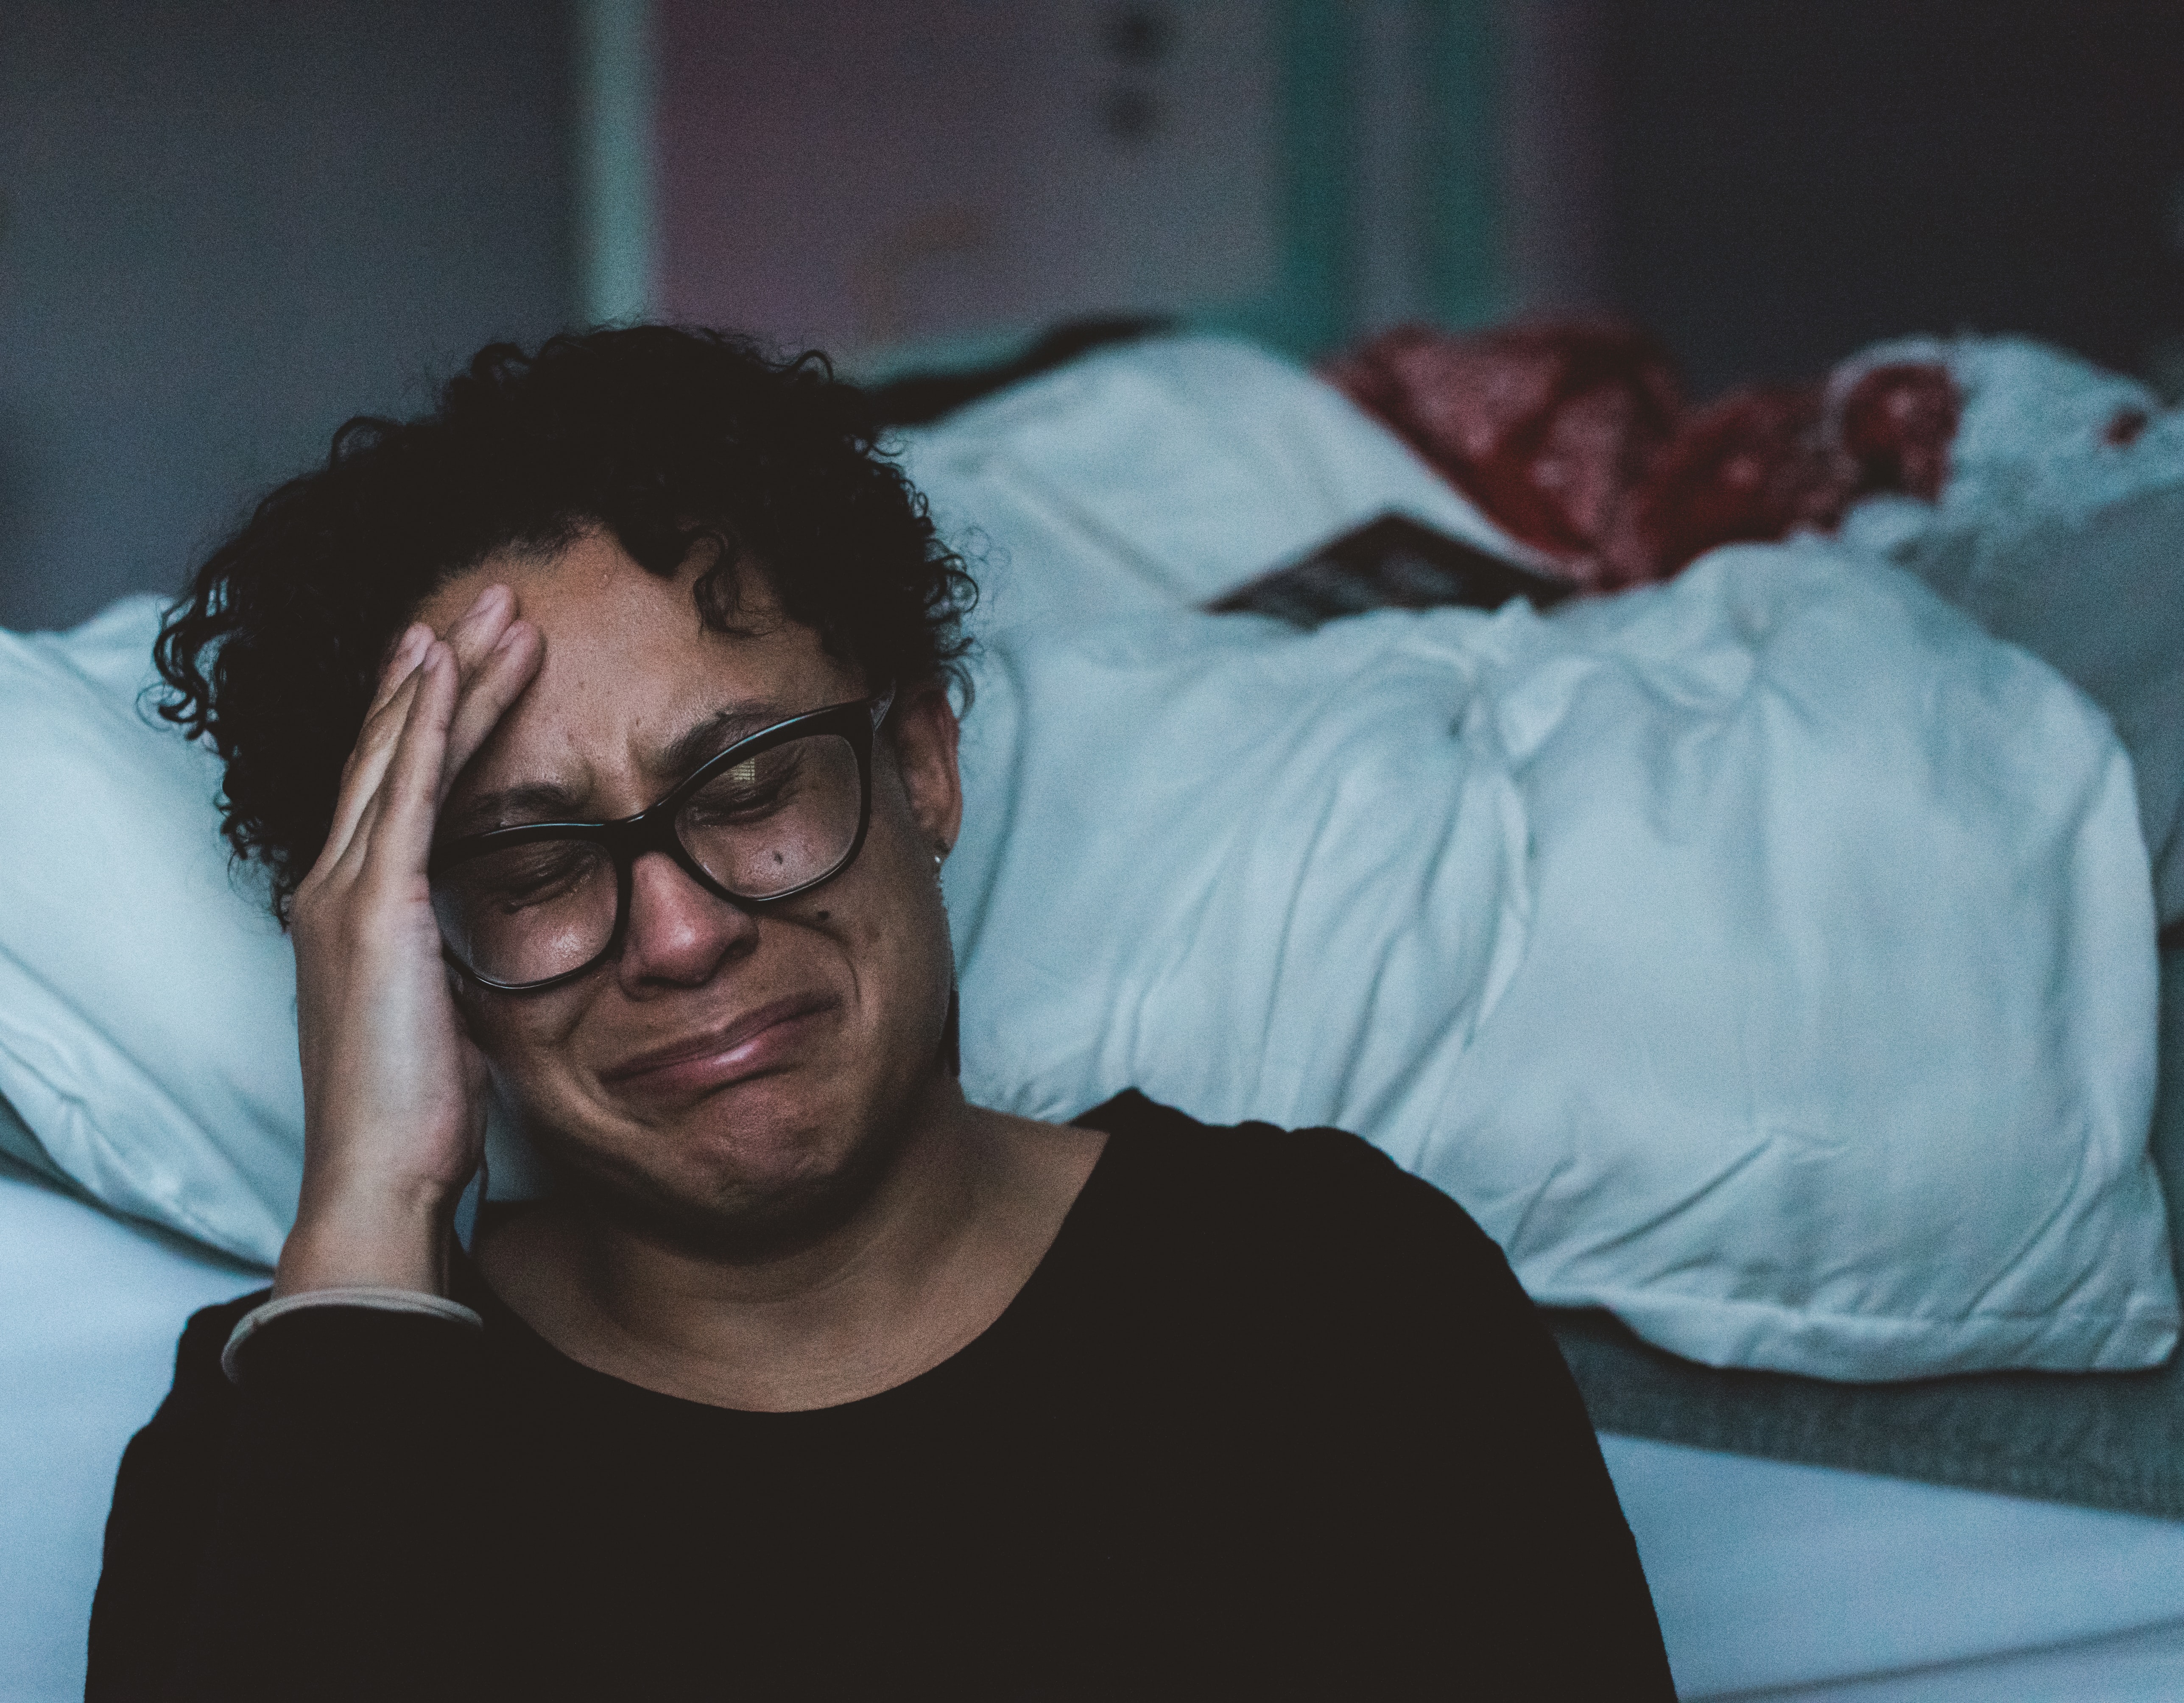 Woman sobbing beside a bed.